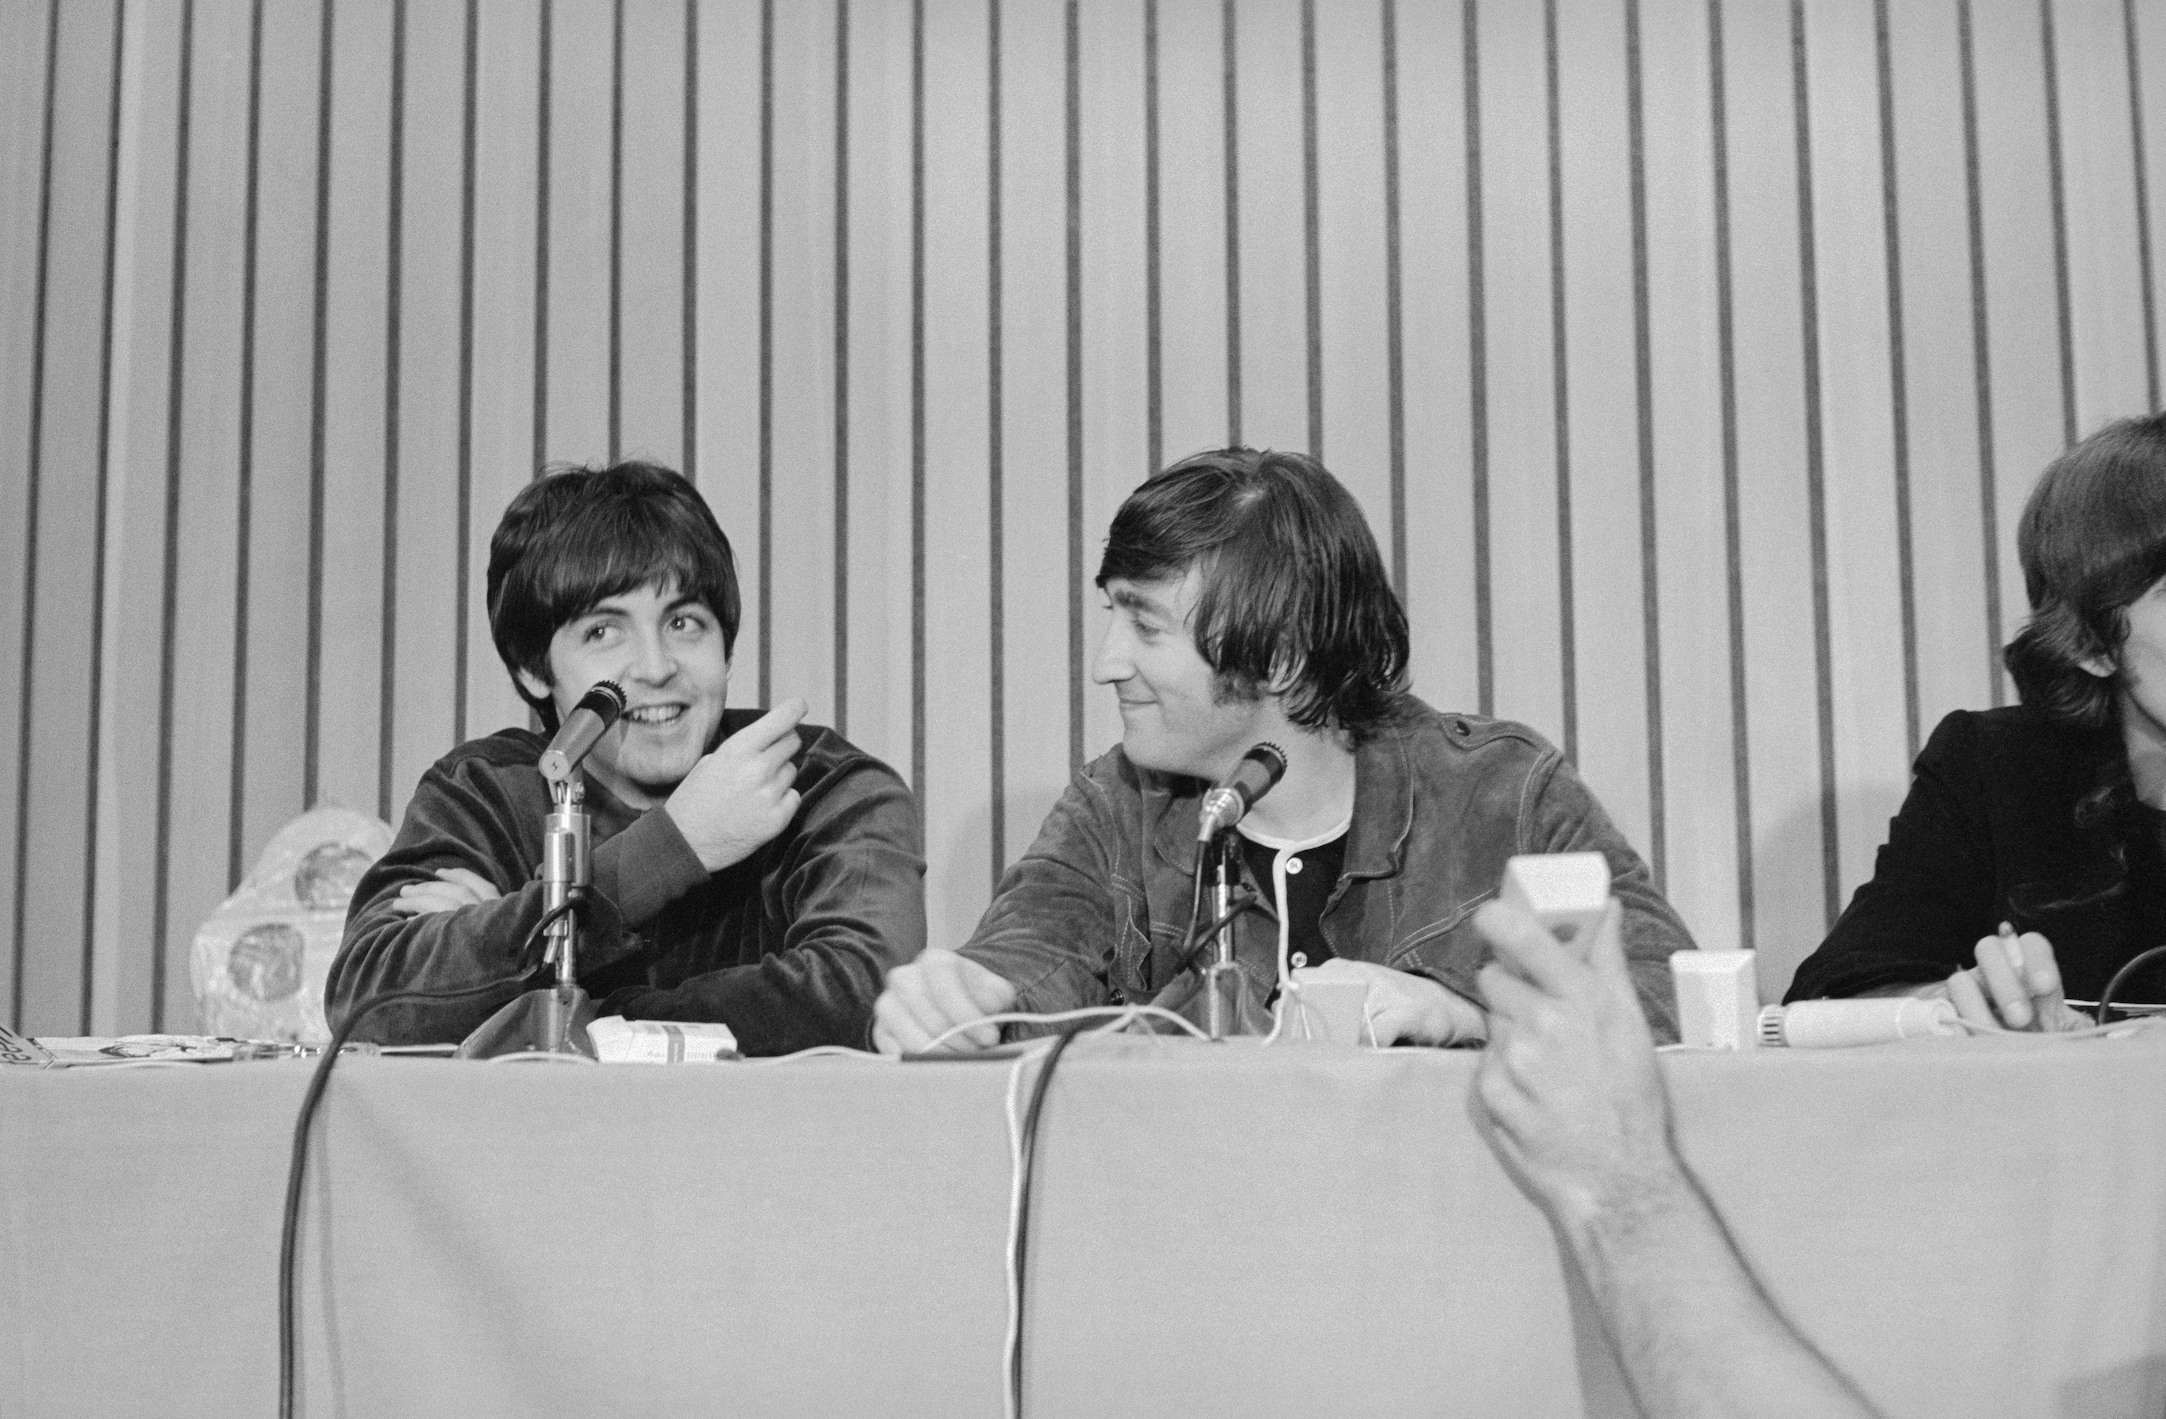 Paul McCartney and John Lennon speak at a press conference following The Beatles performance in Portland